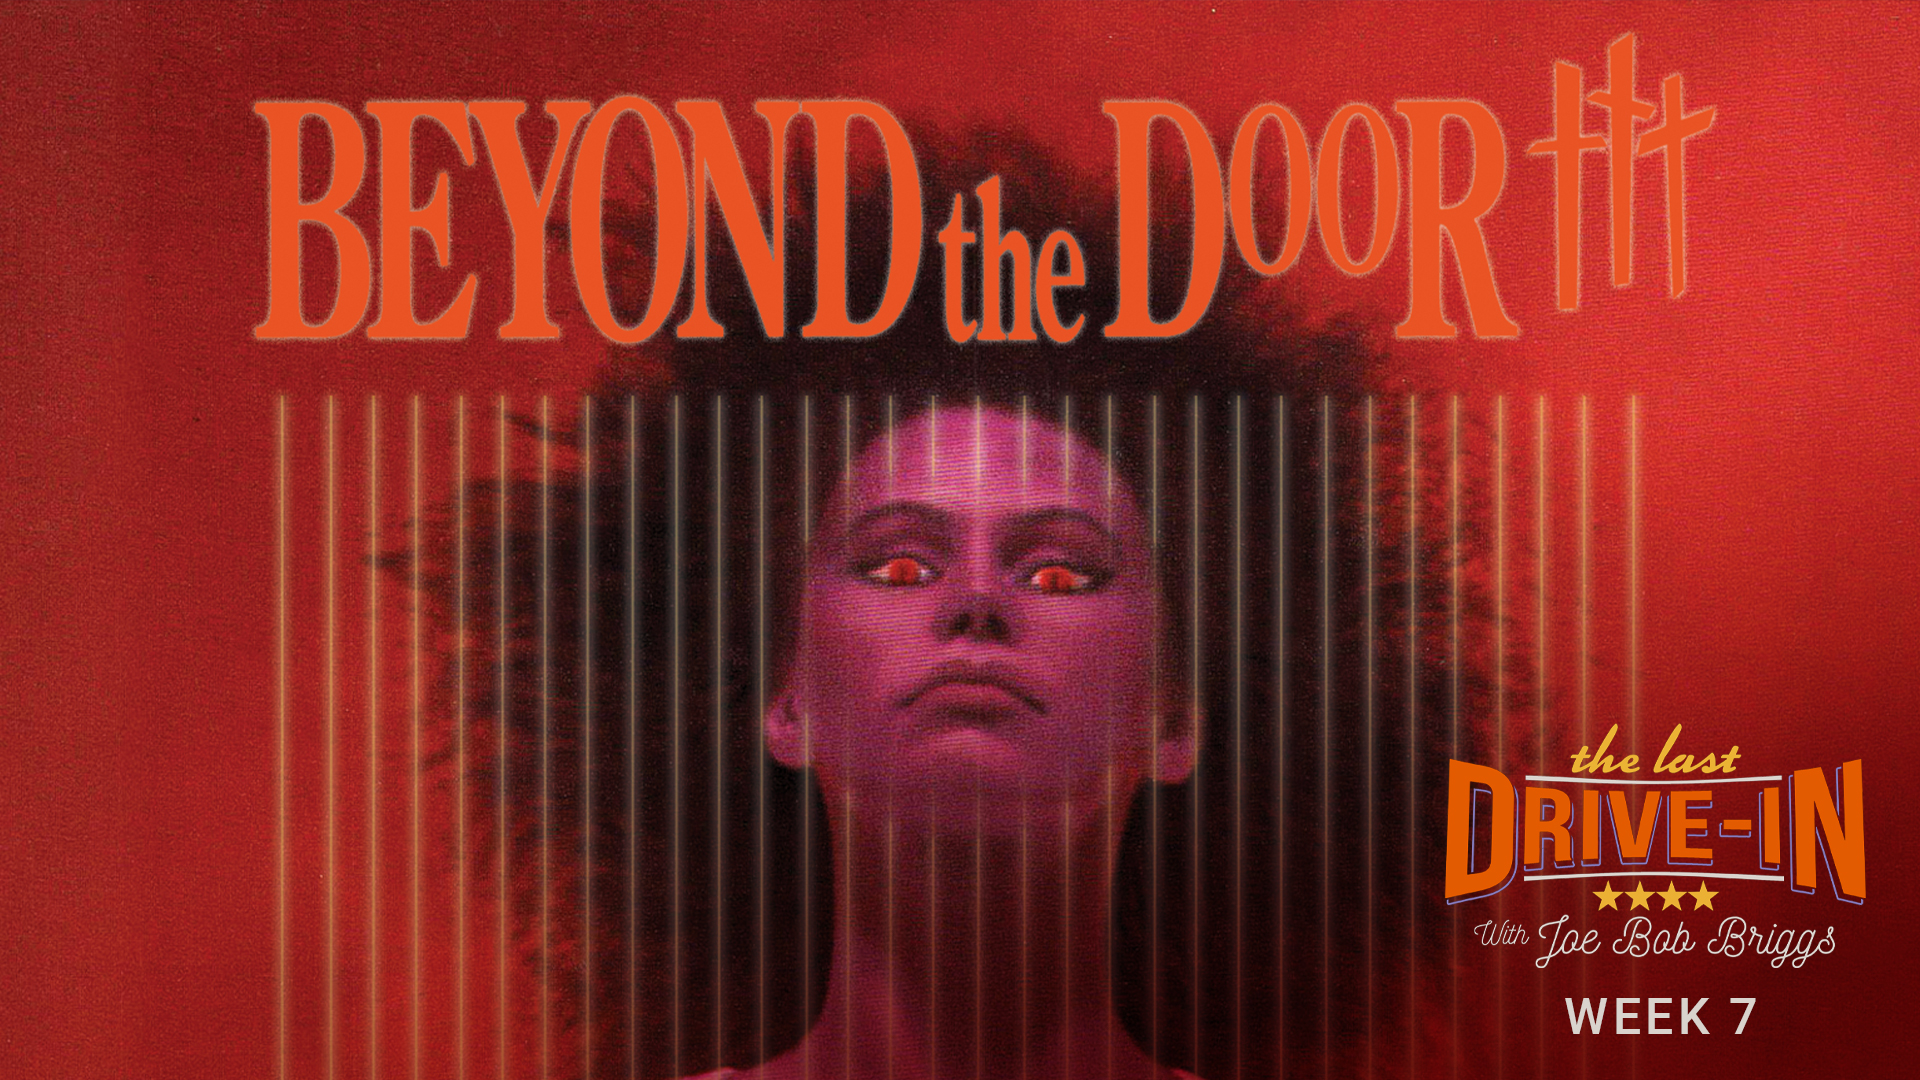 Week 7: Beyond the Door III, A coed is wanted by the Prince of Darkness to be his bride., TV-MA, Season 1062609, Episode 14